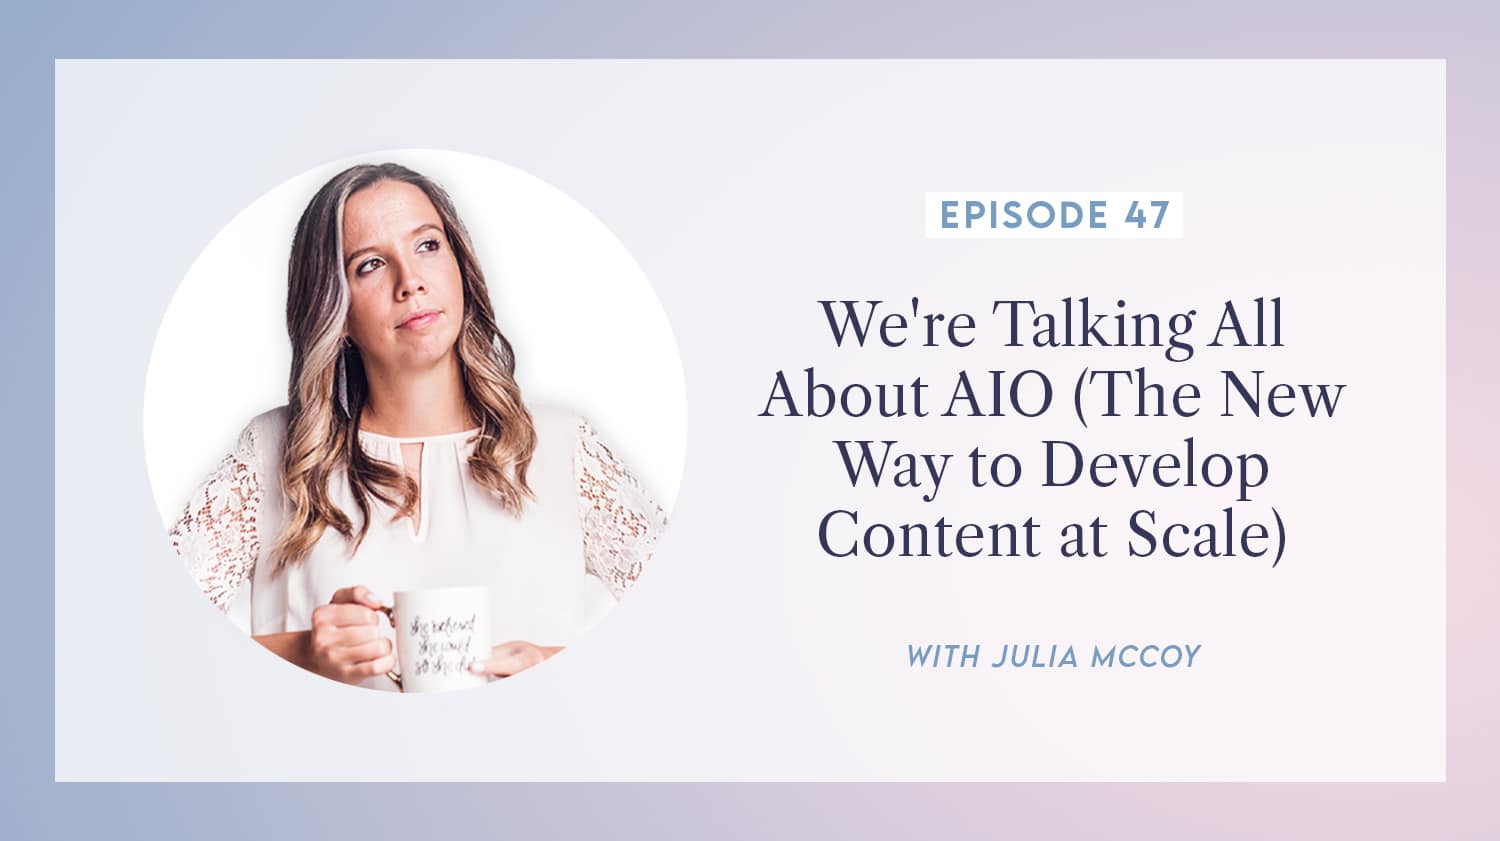 content transformation podcast with julia mccoy episode 47 we're talking all about AIO (the new way to develop content at scale)